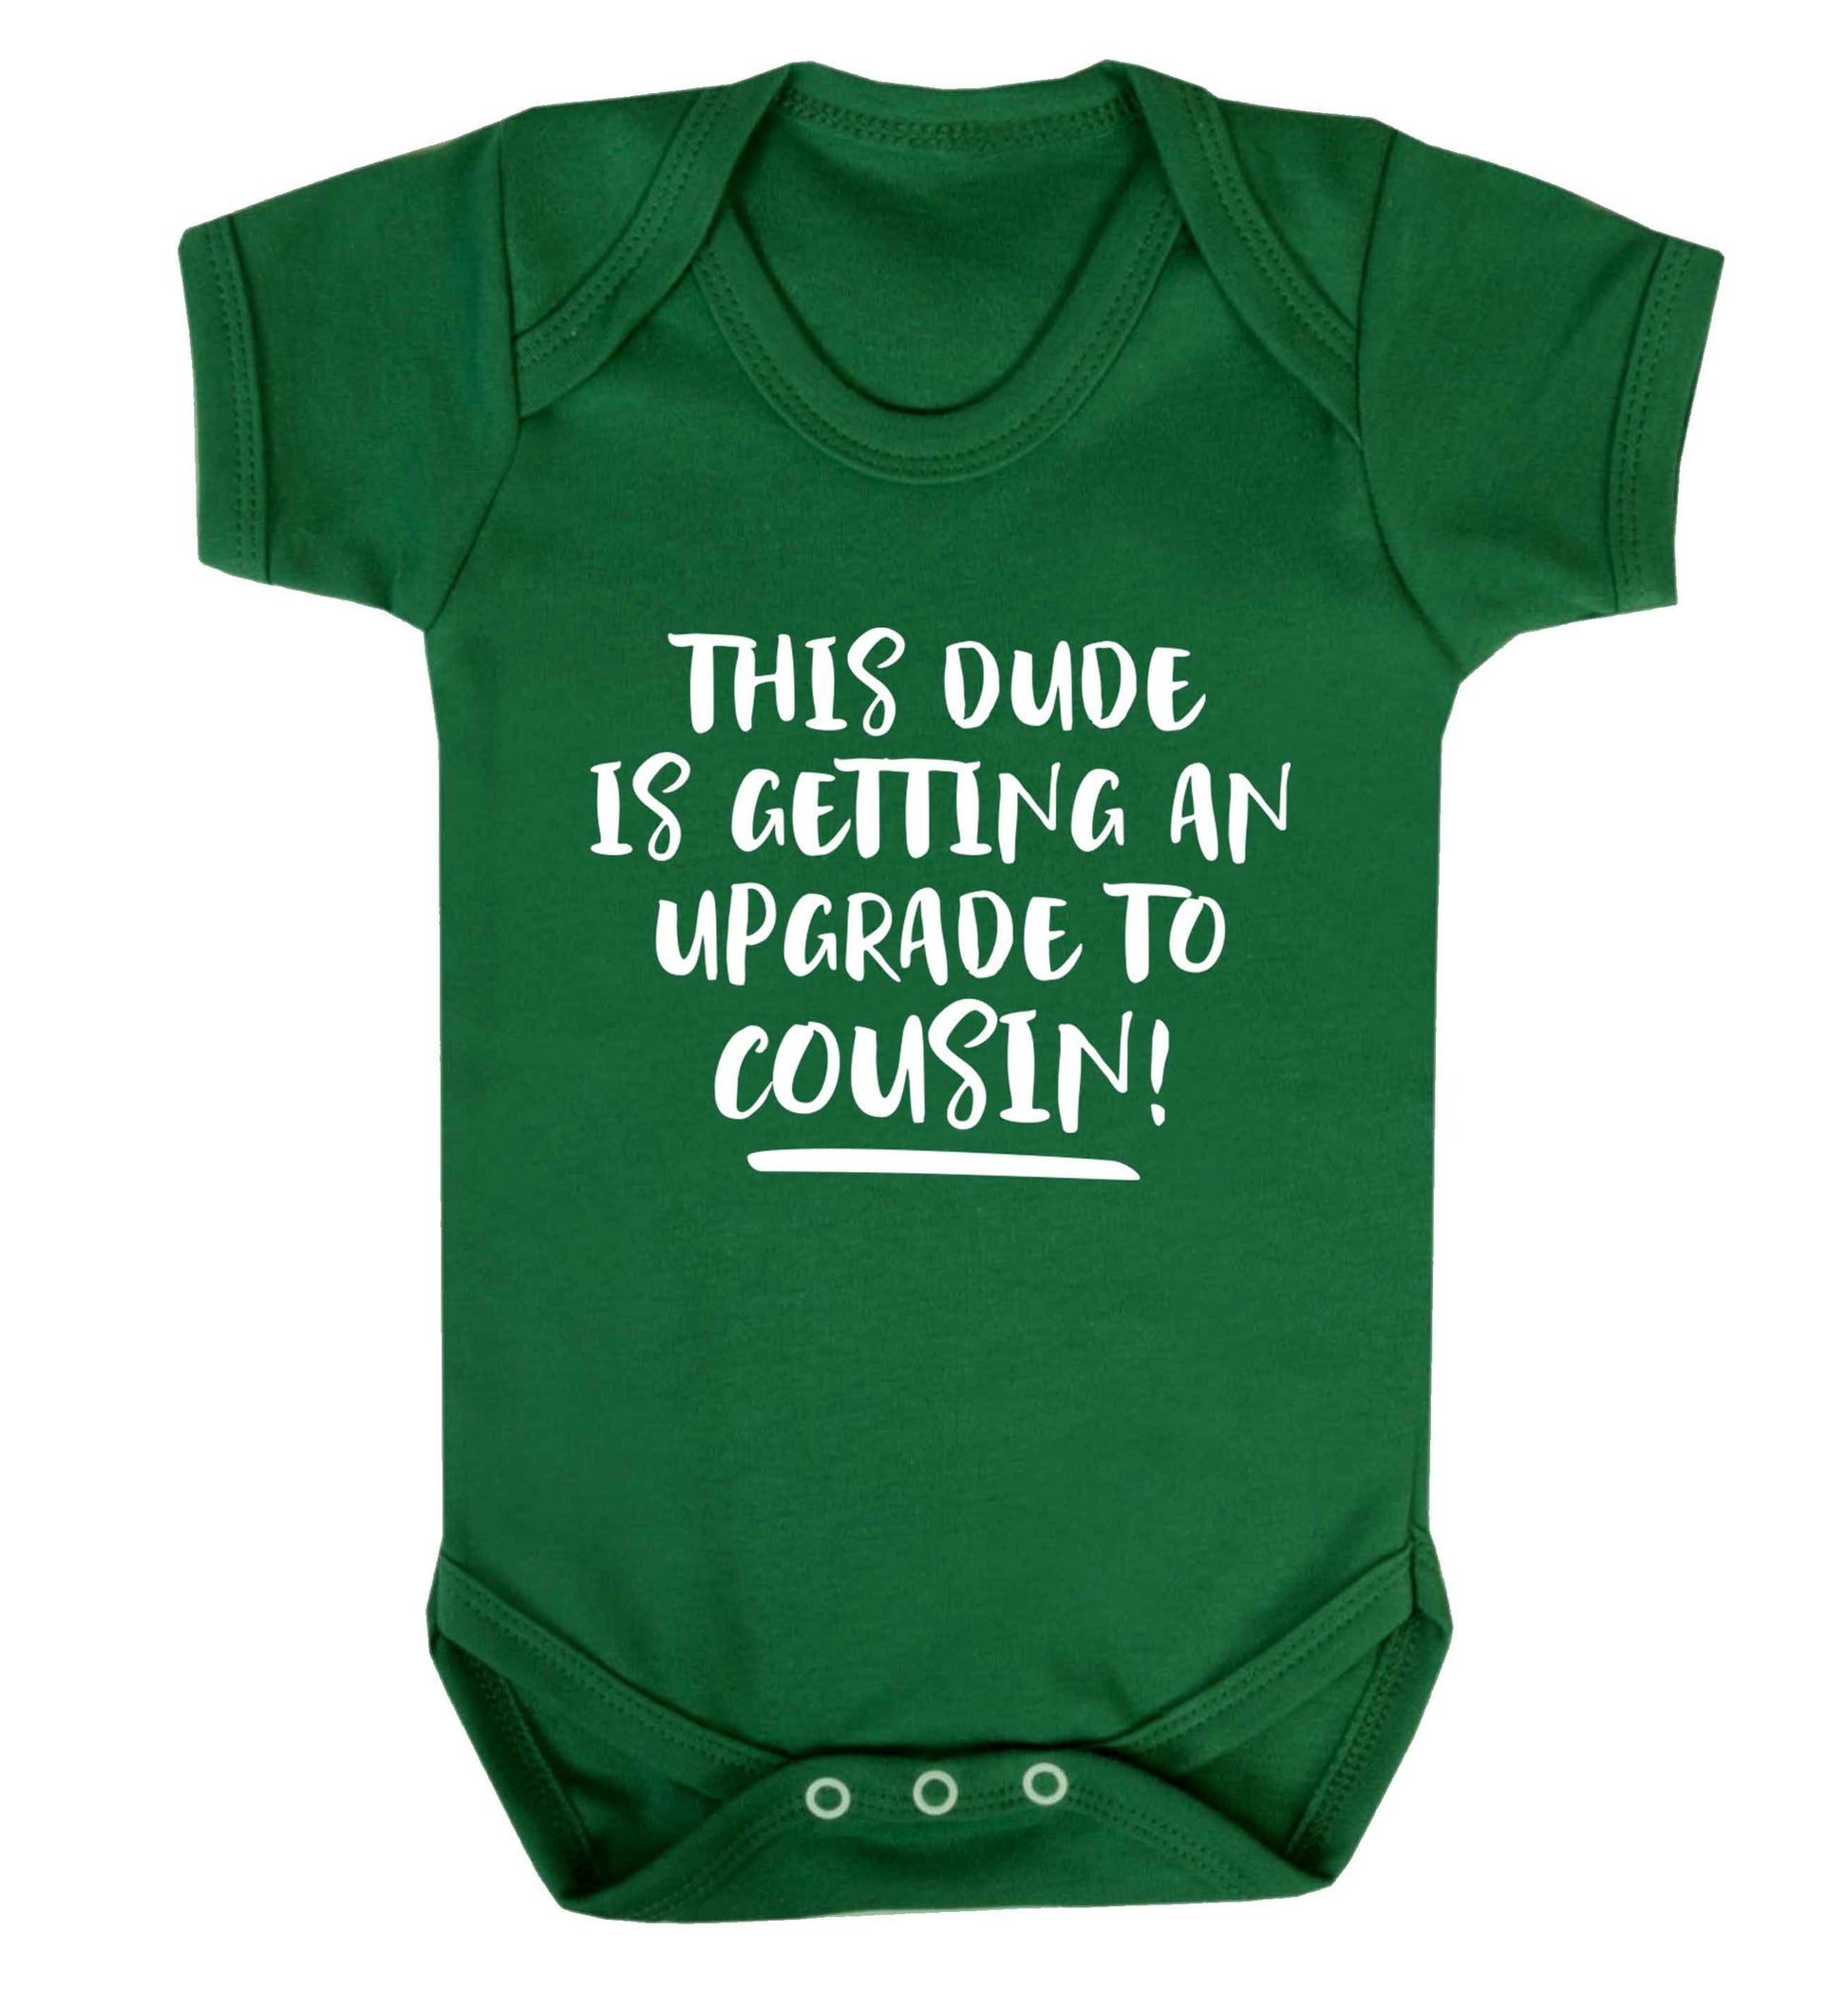 This dude is getting an upgrade to cousin! Baby Vest green 18-24 months